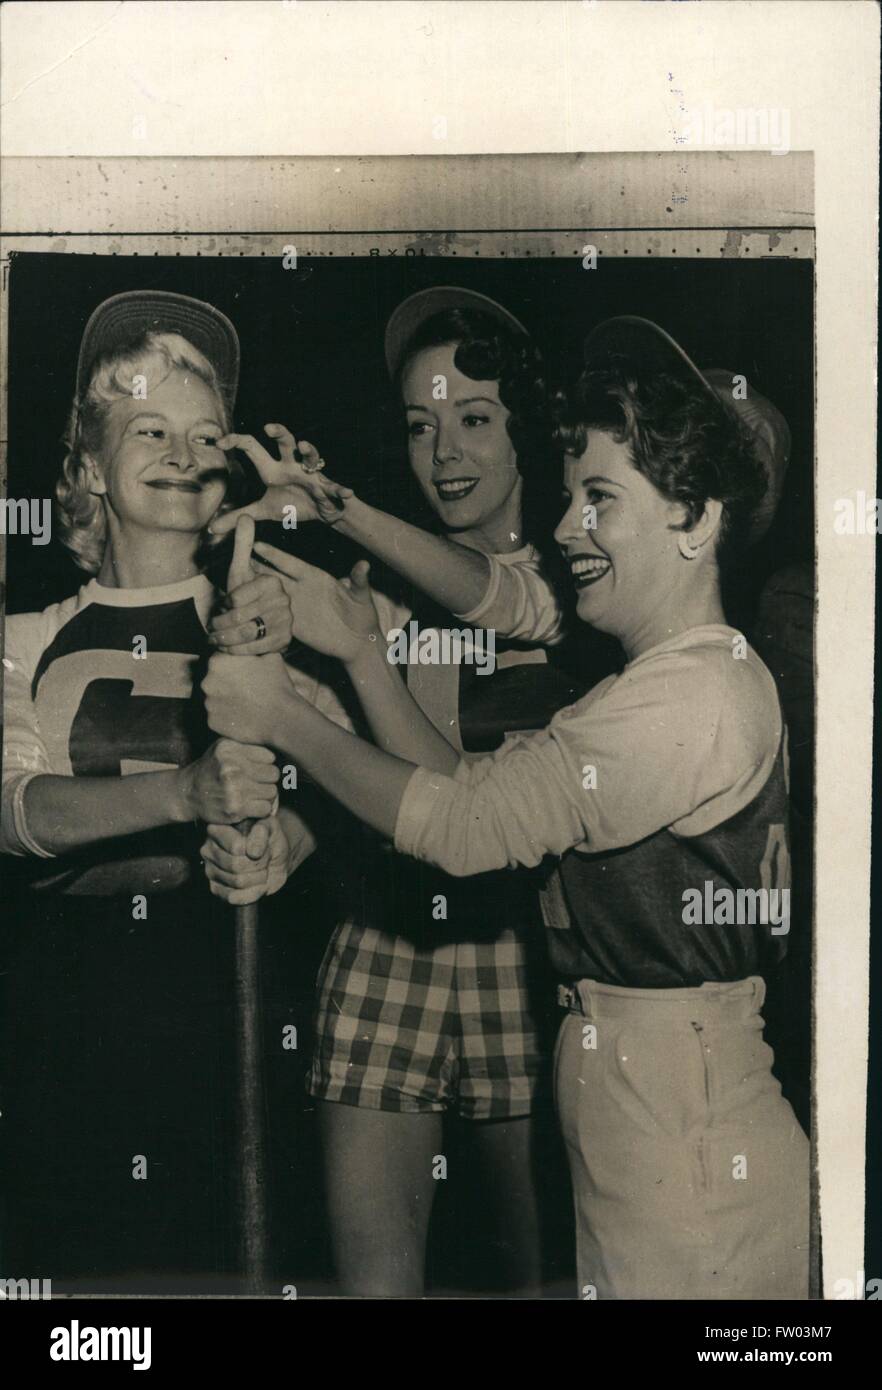 1959 - Film stars play baseball for Charity. Photo shows L to R: Film stars Marilyn Maxwell, Liza Kirk and Gloria De Haven, have a spot of fun with a baseball bat, prior to taking part in a burlesque baseball game, held in Hollywood in aid of a local charity. © Keystone Pictures USA/ZUMAPRESS.com/Alamy Live News Stock Photo